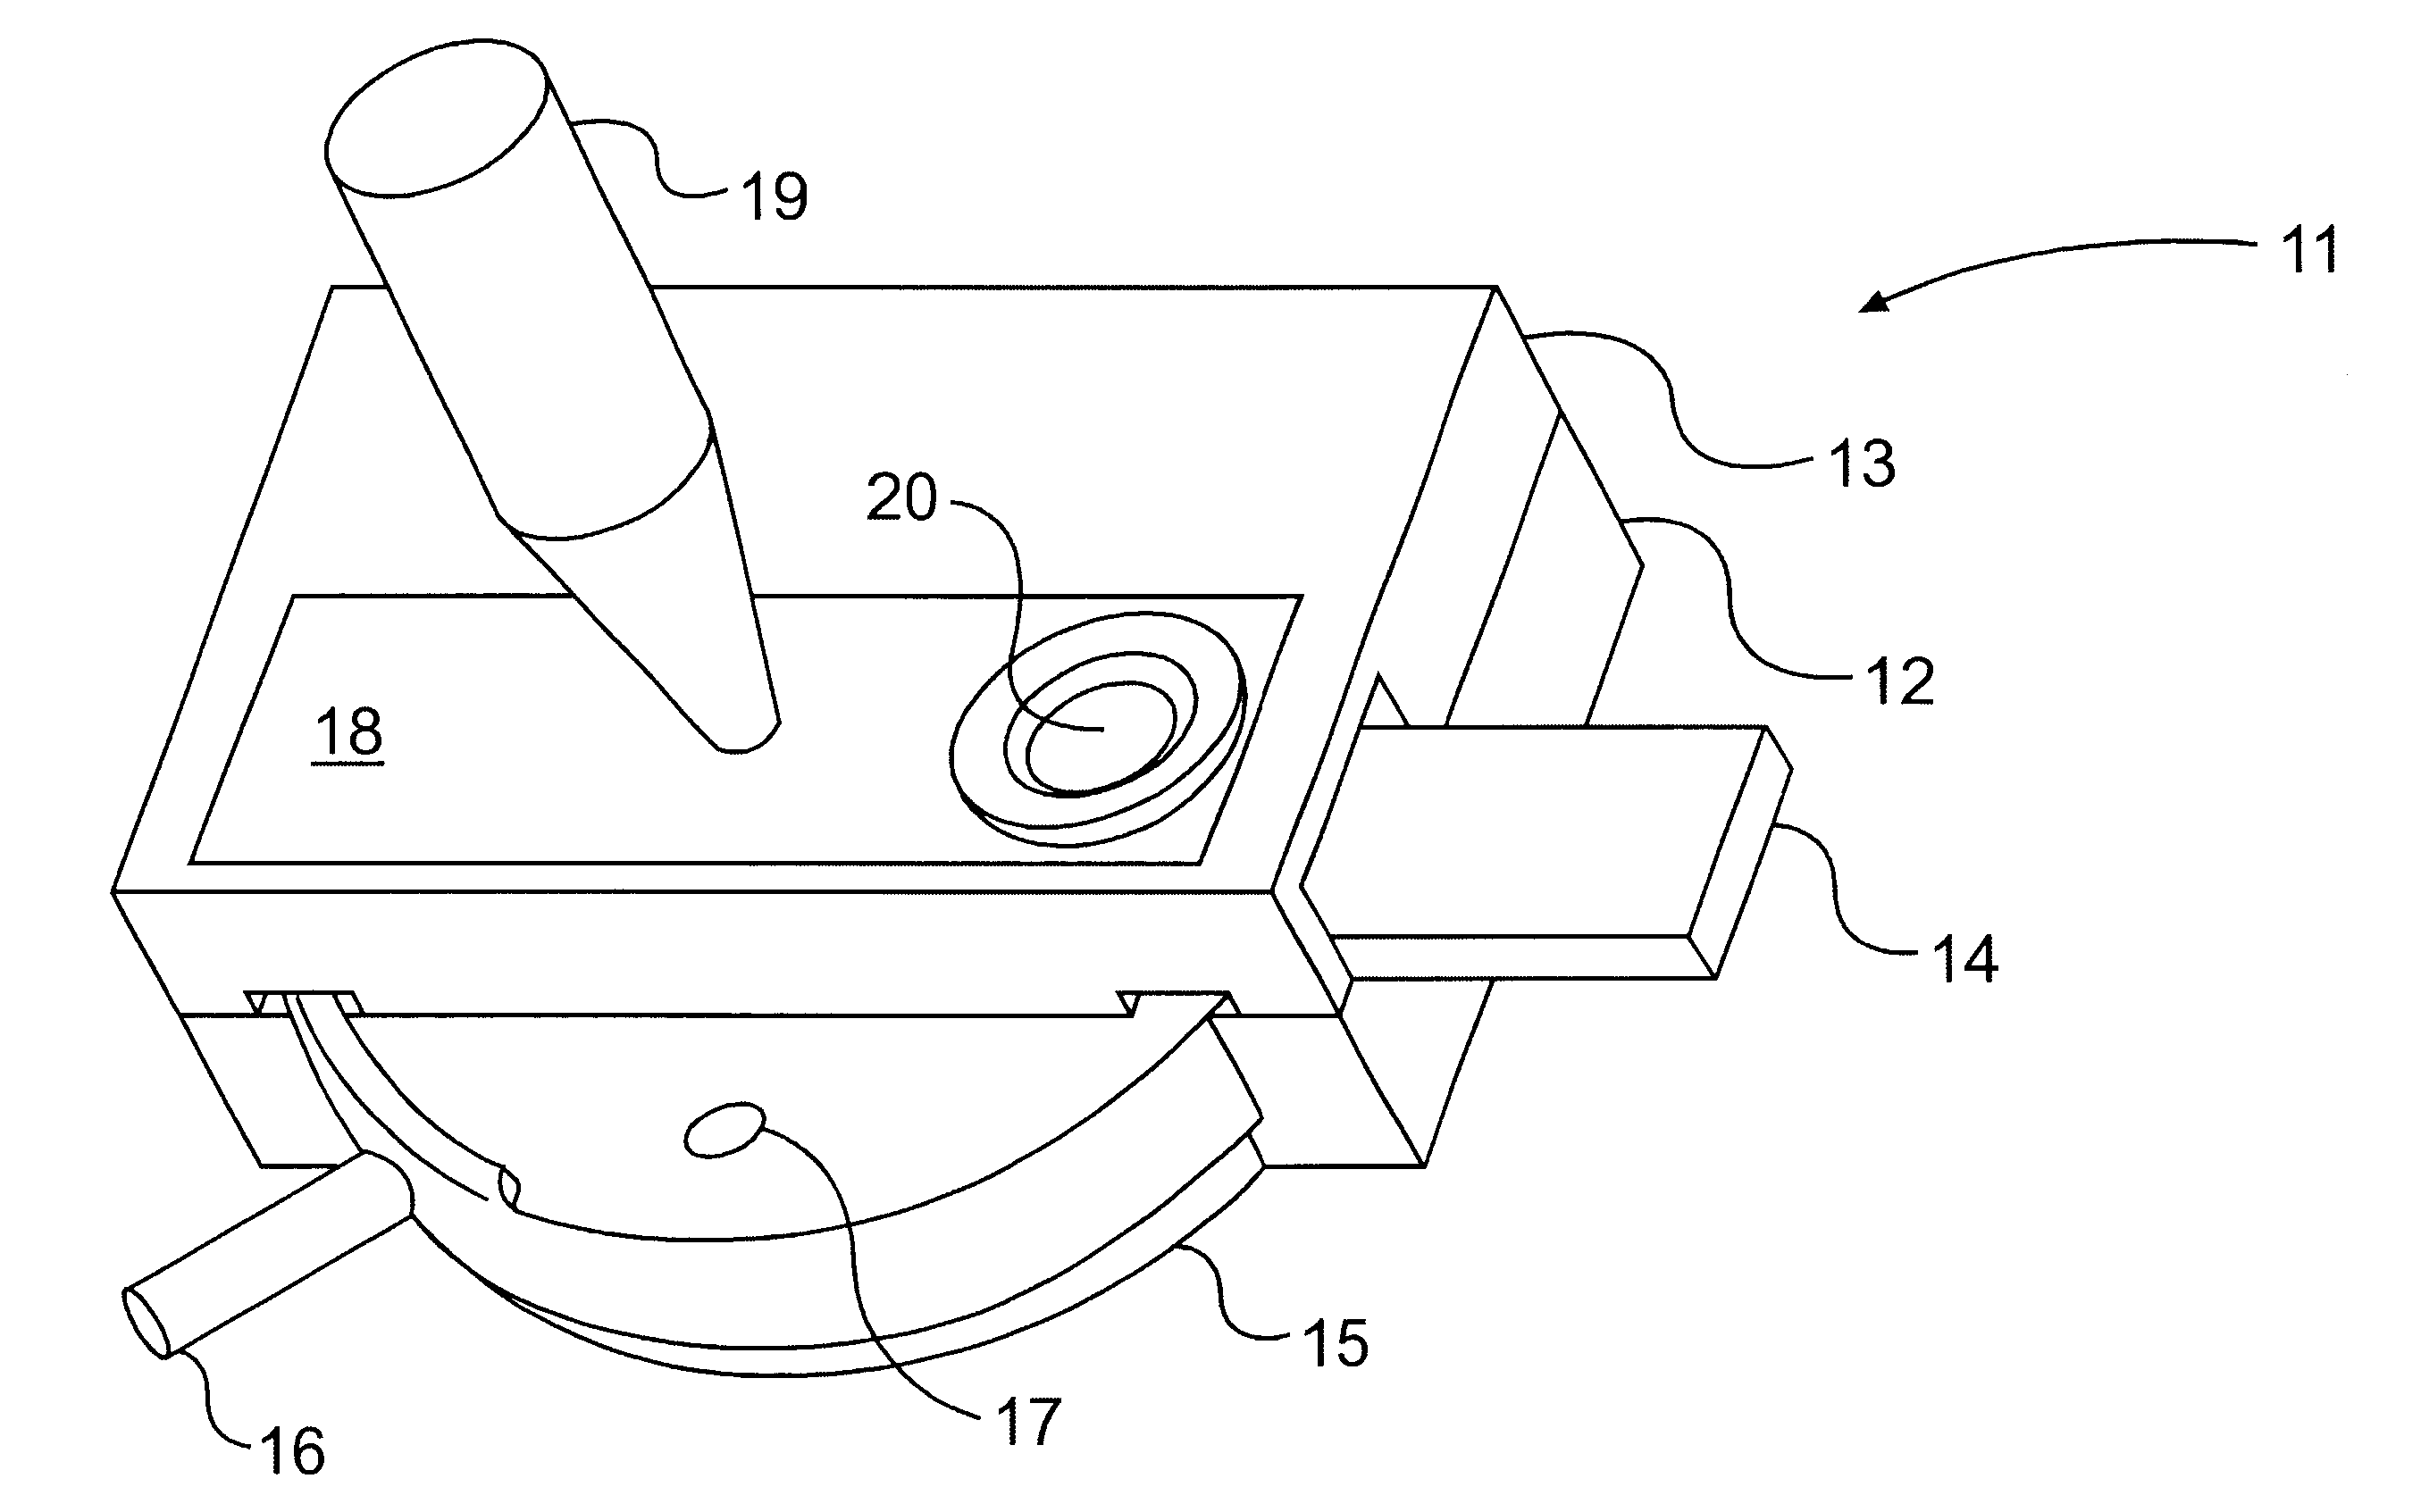 System, method and apparatus for filling containers